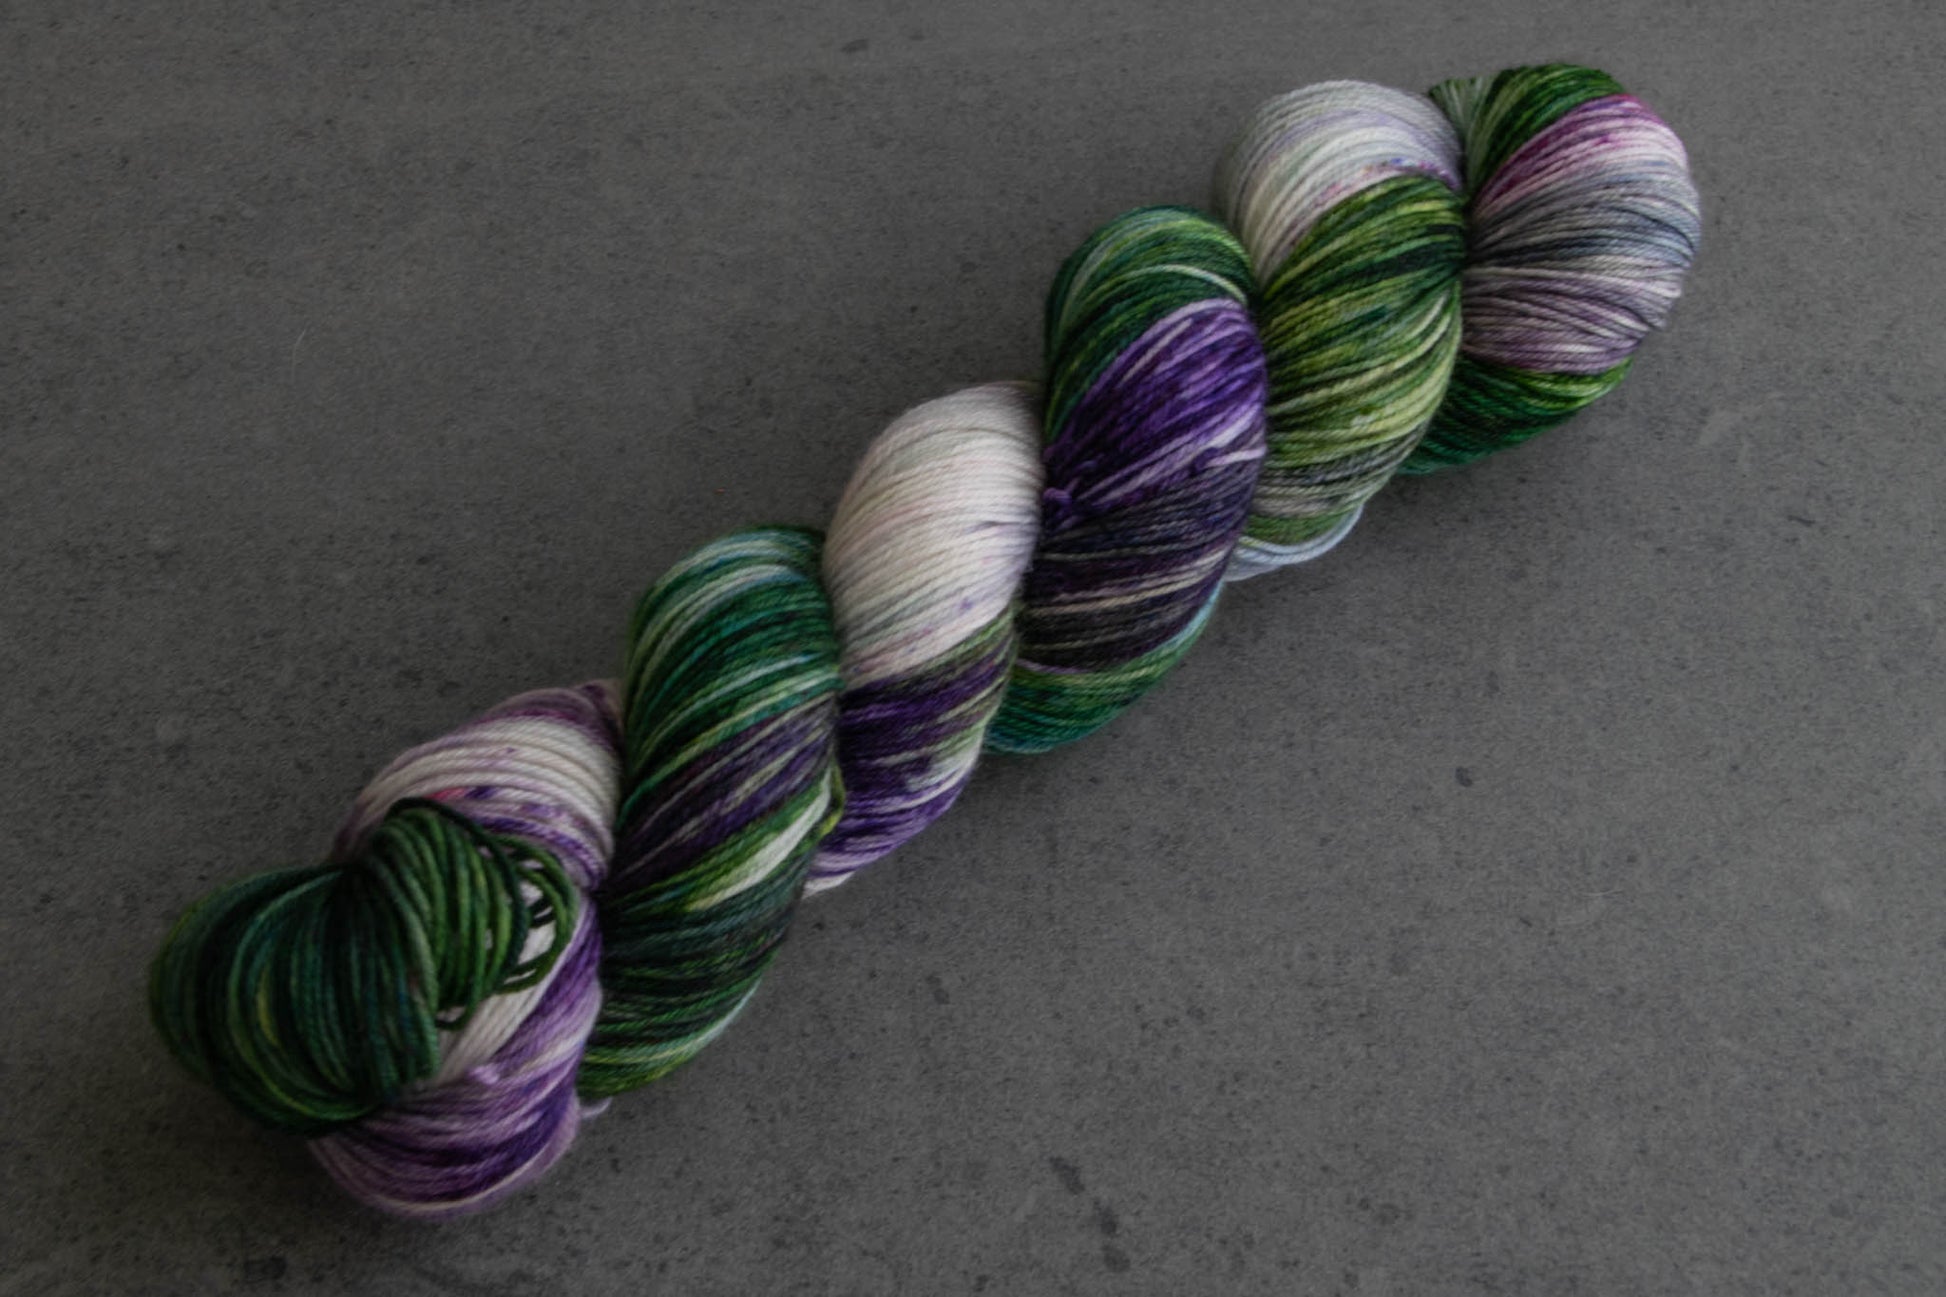 A skein of green, purple, and white variegated hand-dyed wool yarn.